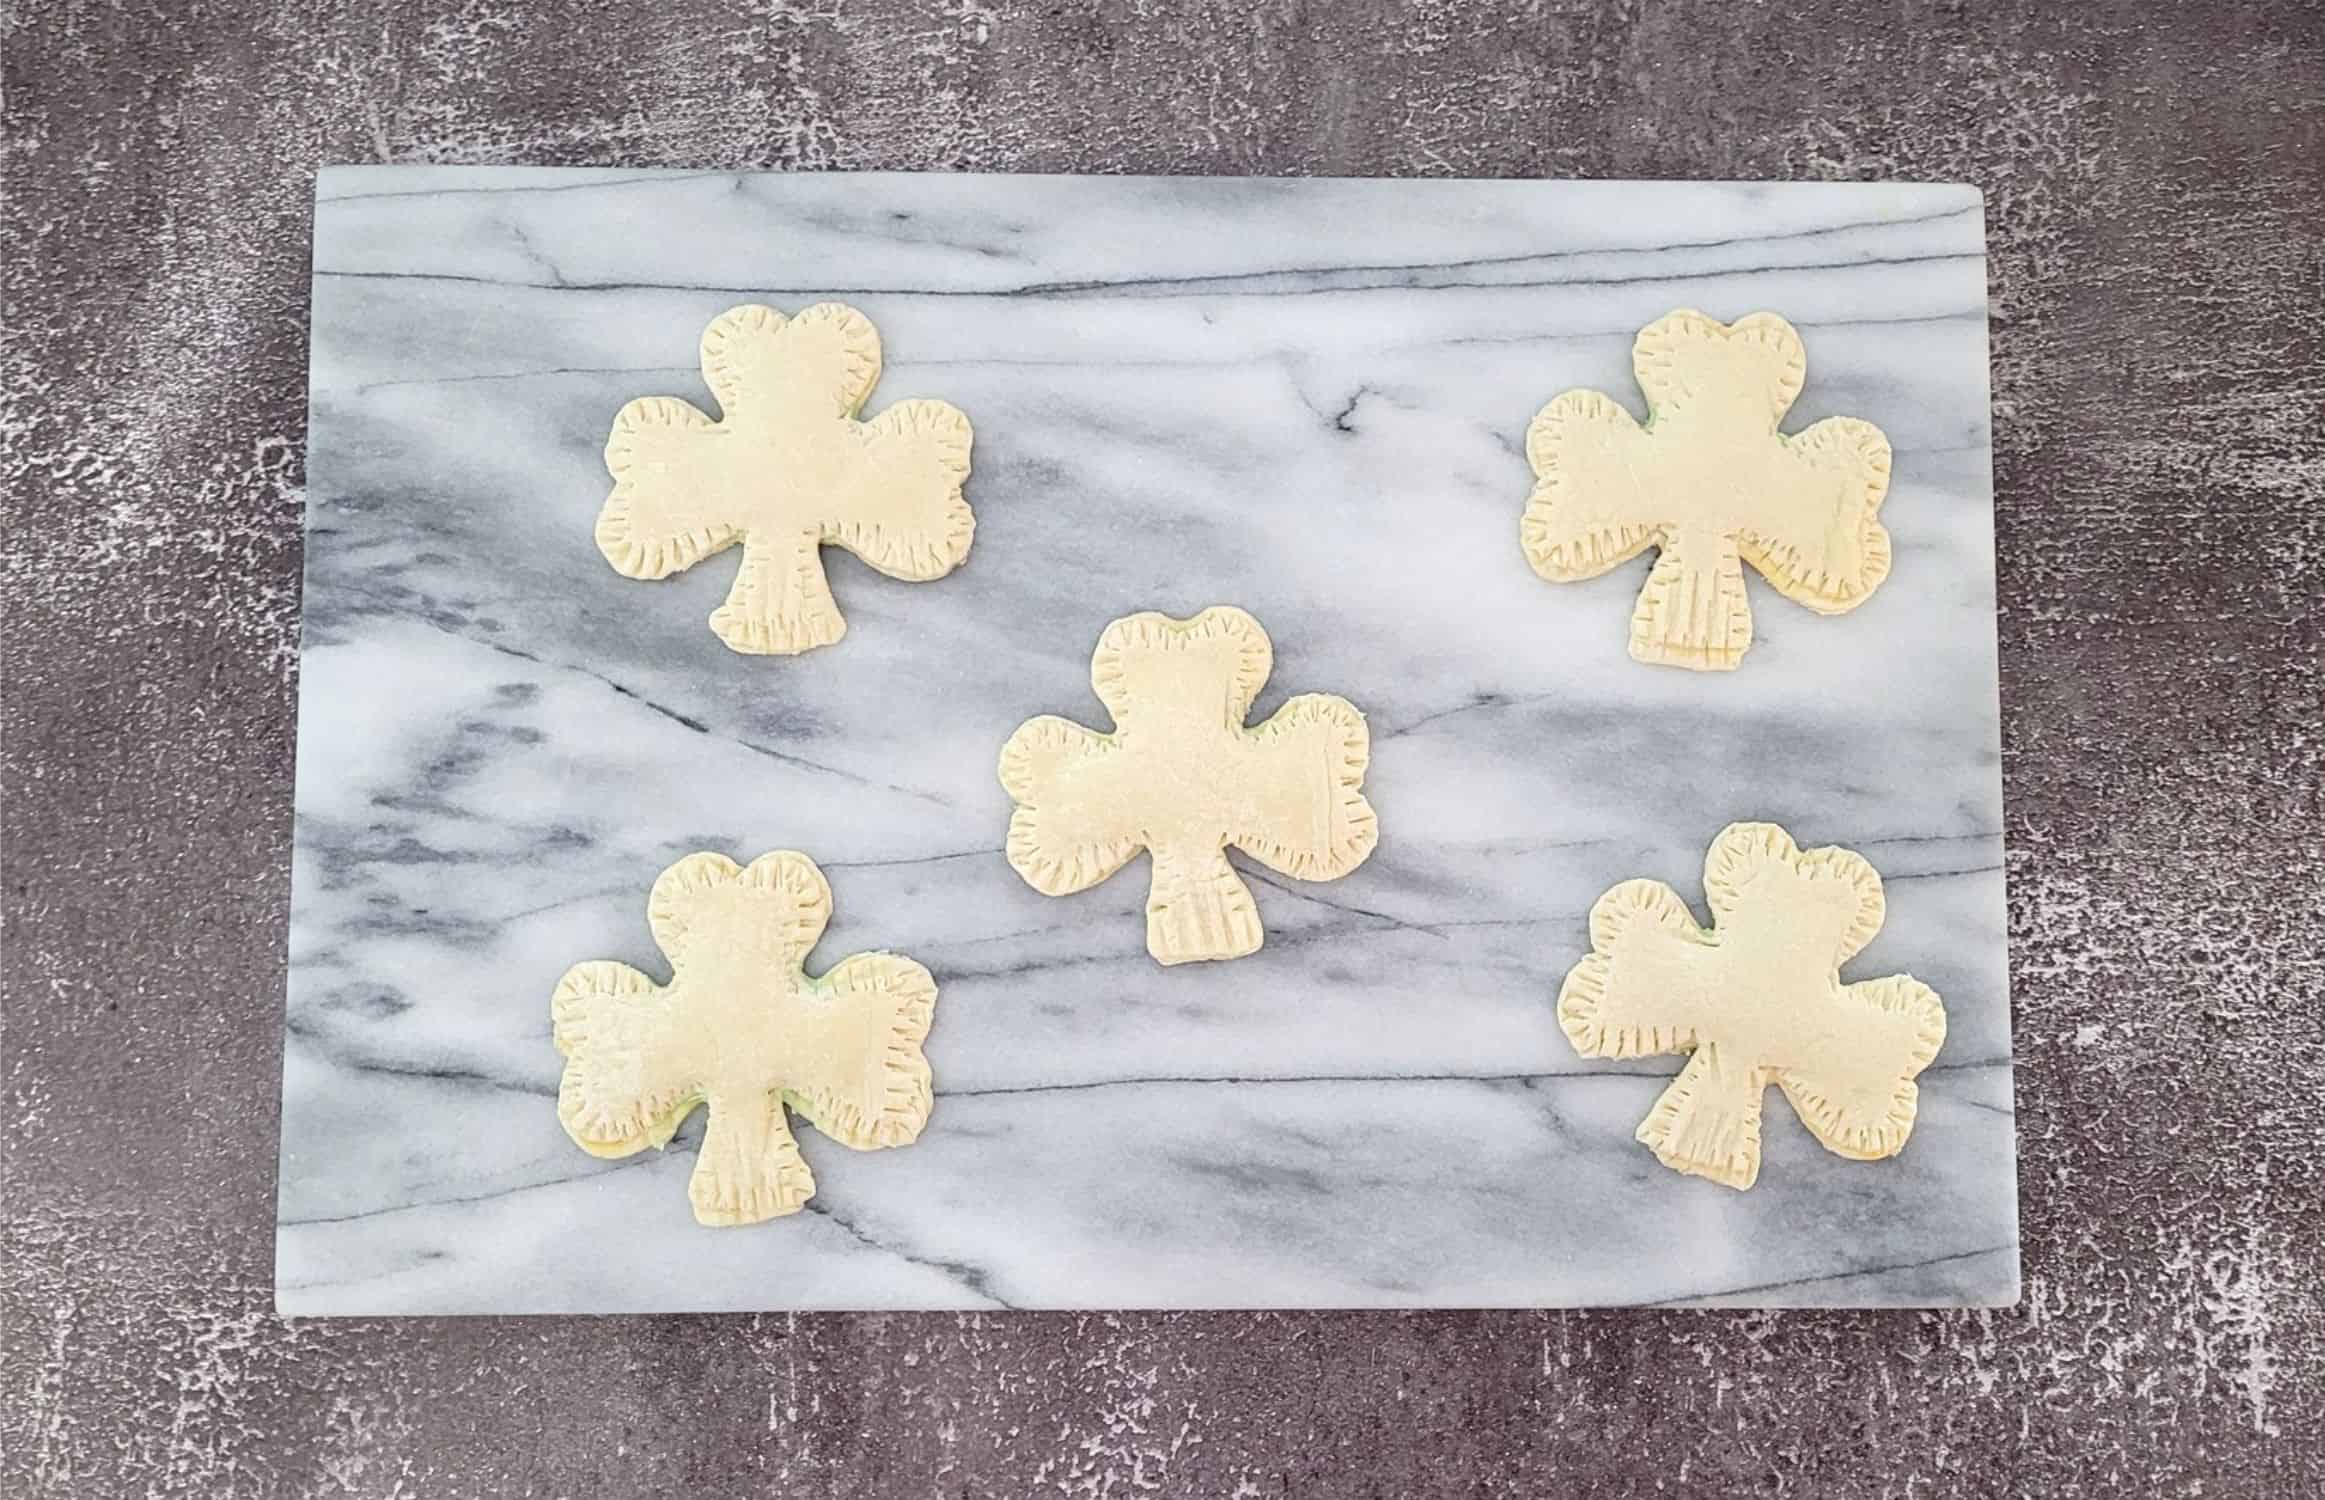 sealed edges of puff pastry shamrocks using a fork